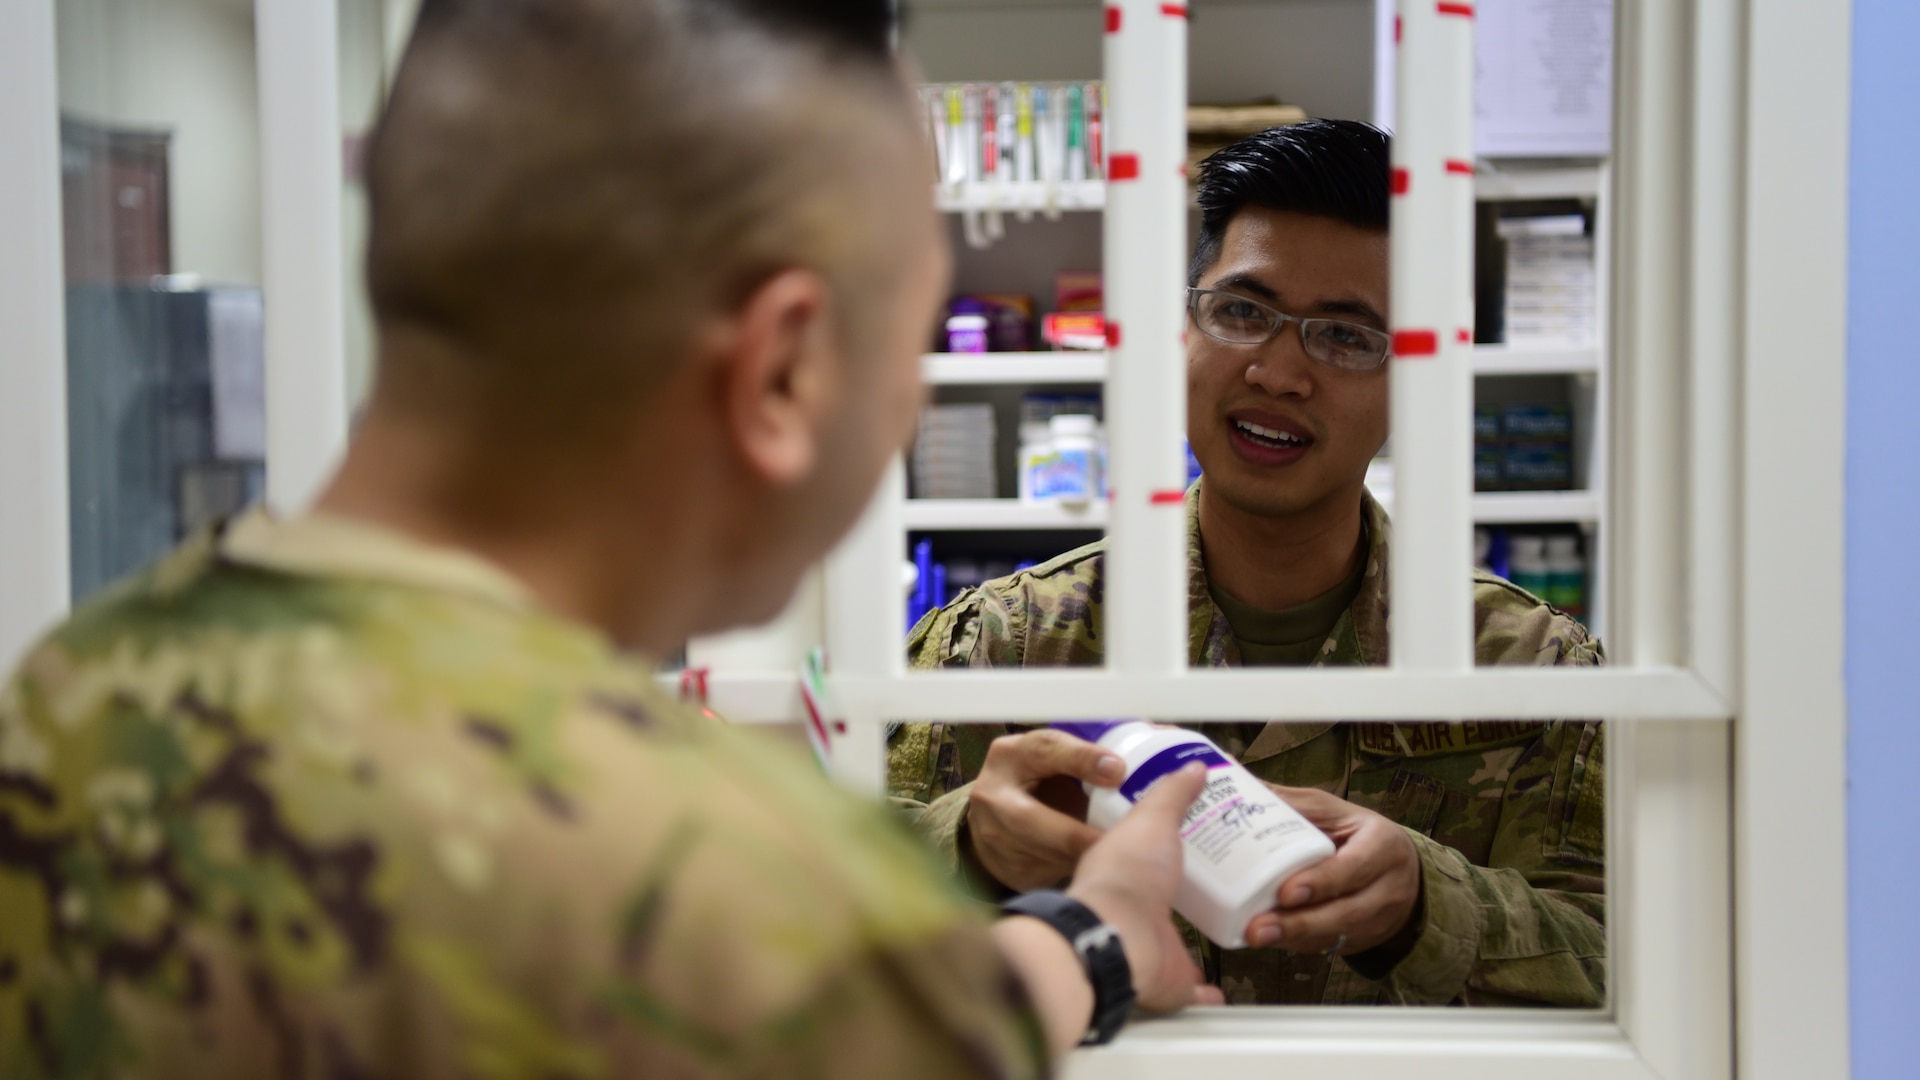 Tech. Sgt. Julian Tayag, 386 EMDG pharmacy non-commissioned officer-in-charge, provides medication to a coworker June 22, 2018, at an undisclosed location in Southwest Asia. In early May 2018, Tayag was selected to attend the Interservice Physician Assistant Program at Joint Base San Antonio-Fort Sam Houston.